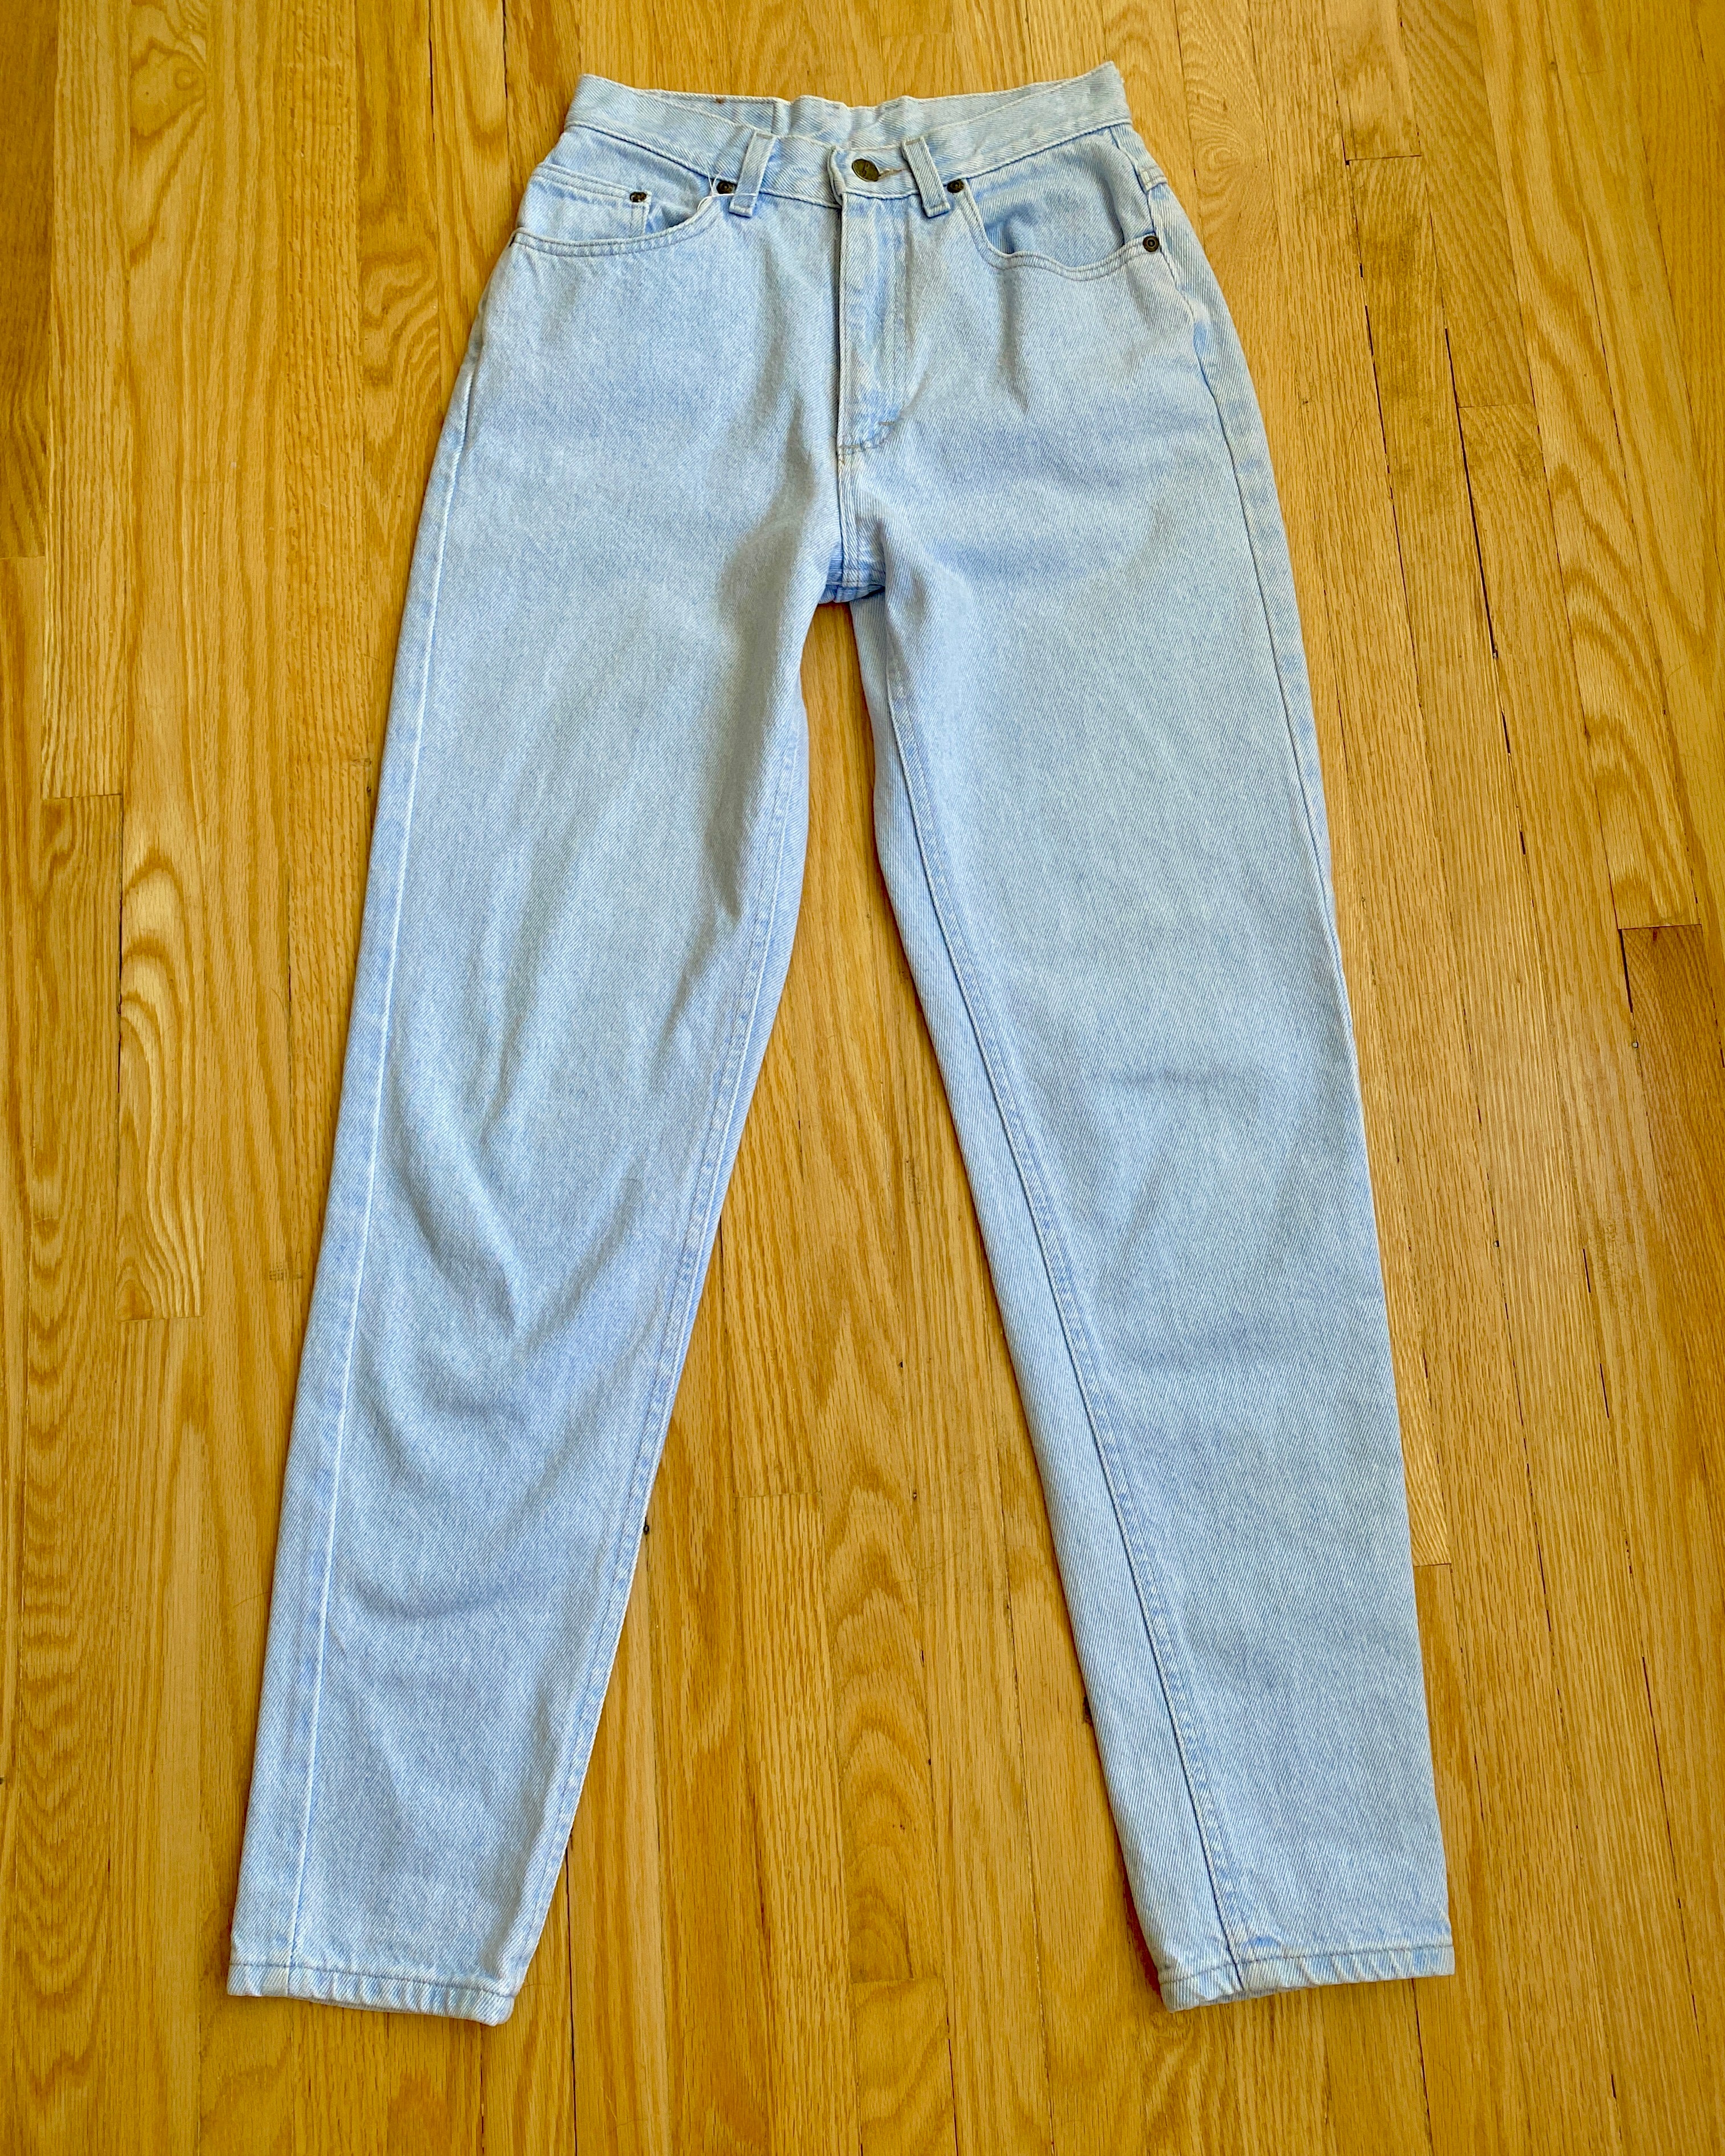 Vintage Riders Light Wash Jeans size 26 or 27 USA